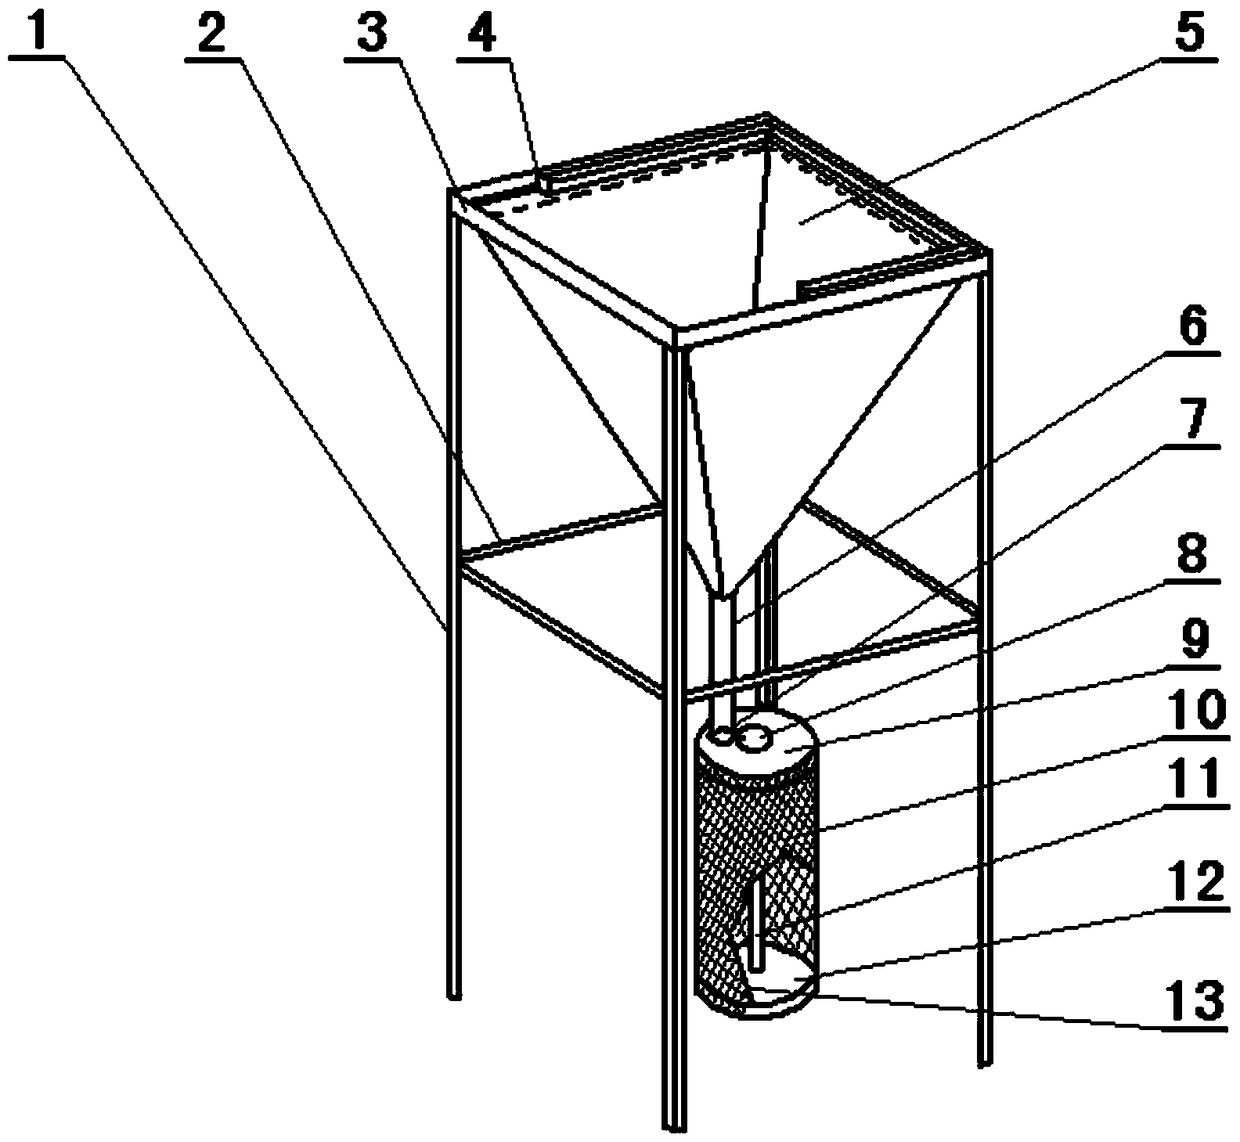 A Simple and Practical Device for Collecting Adult Rice Moth